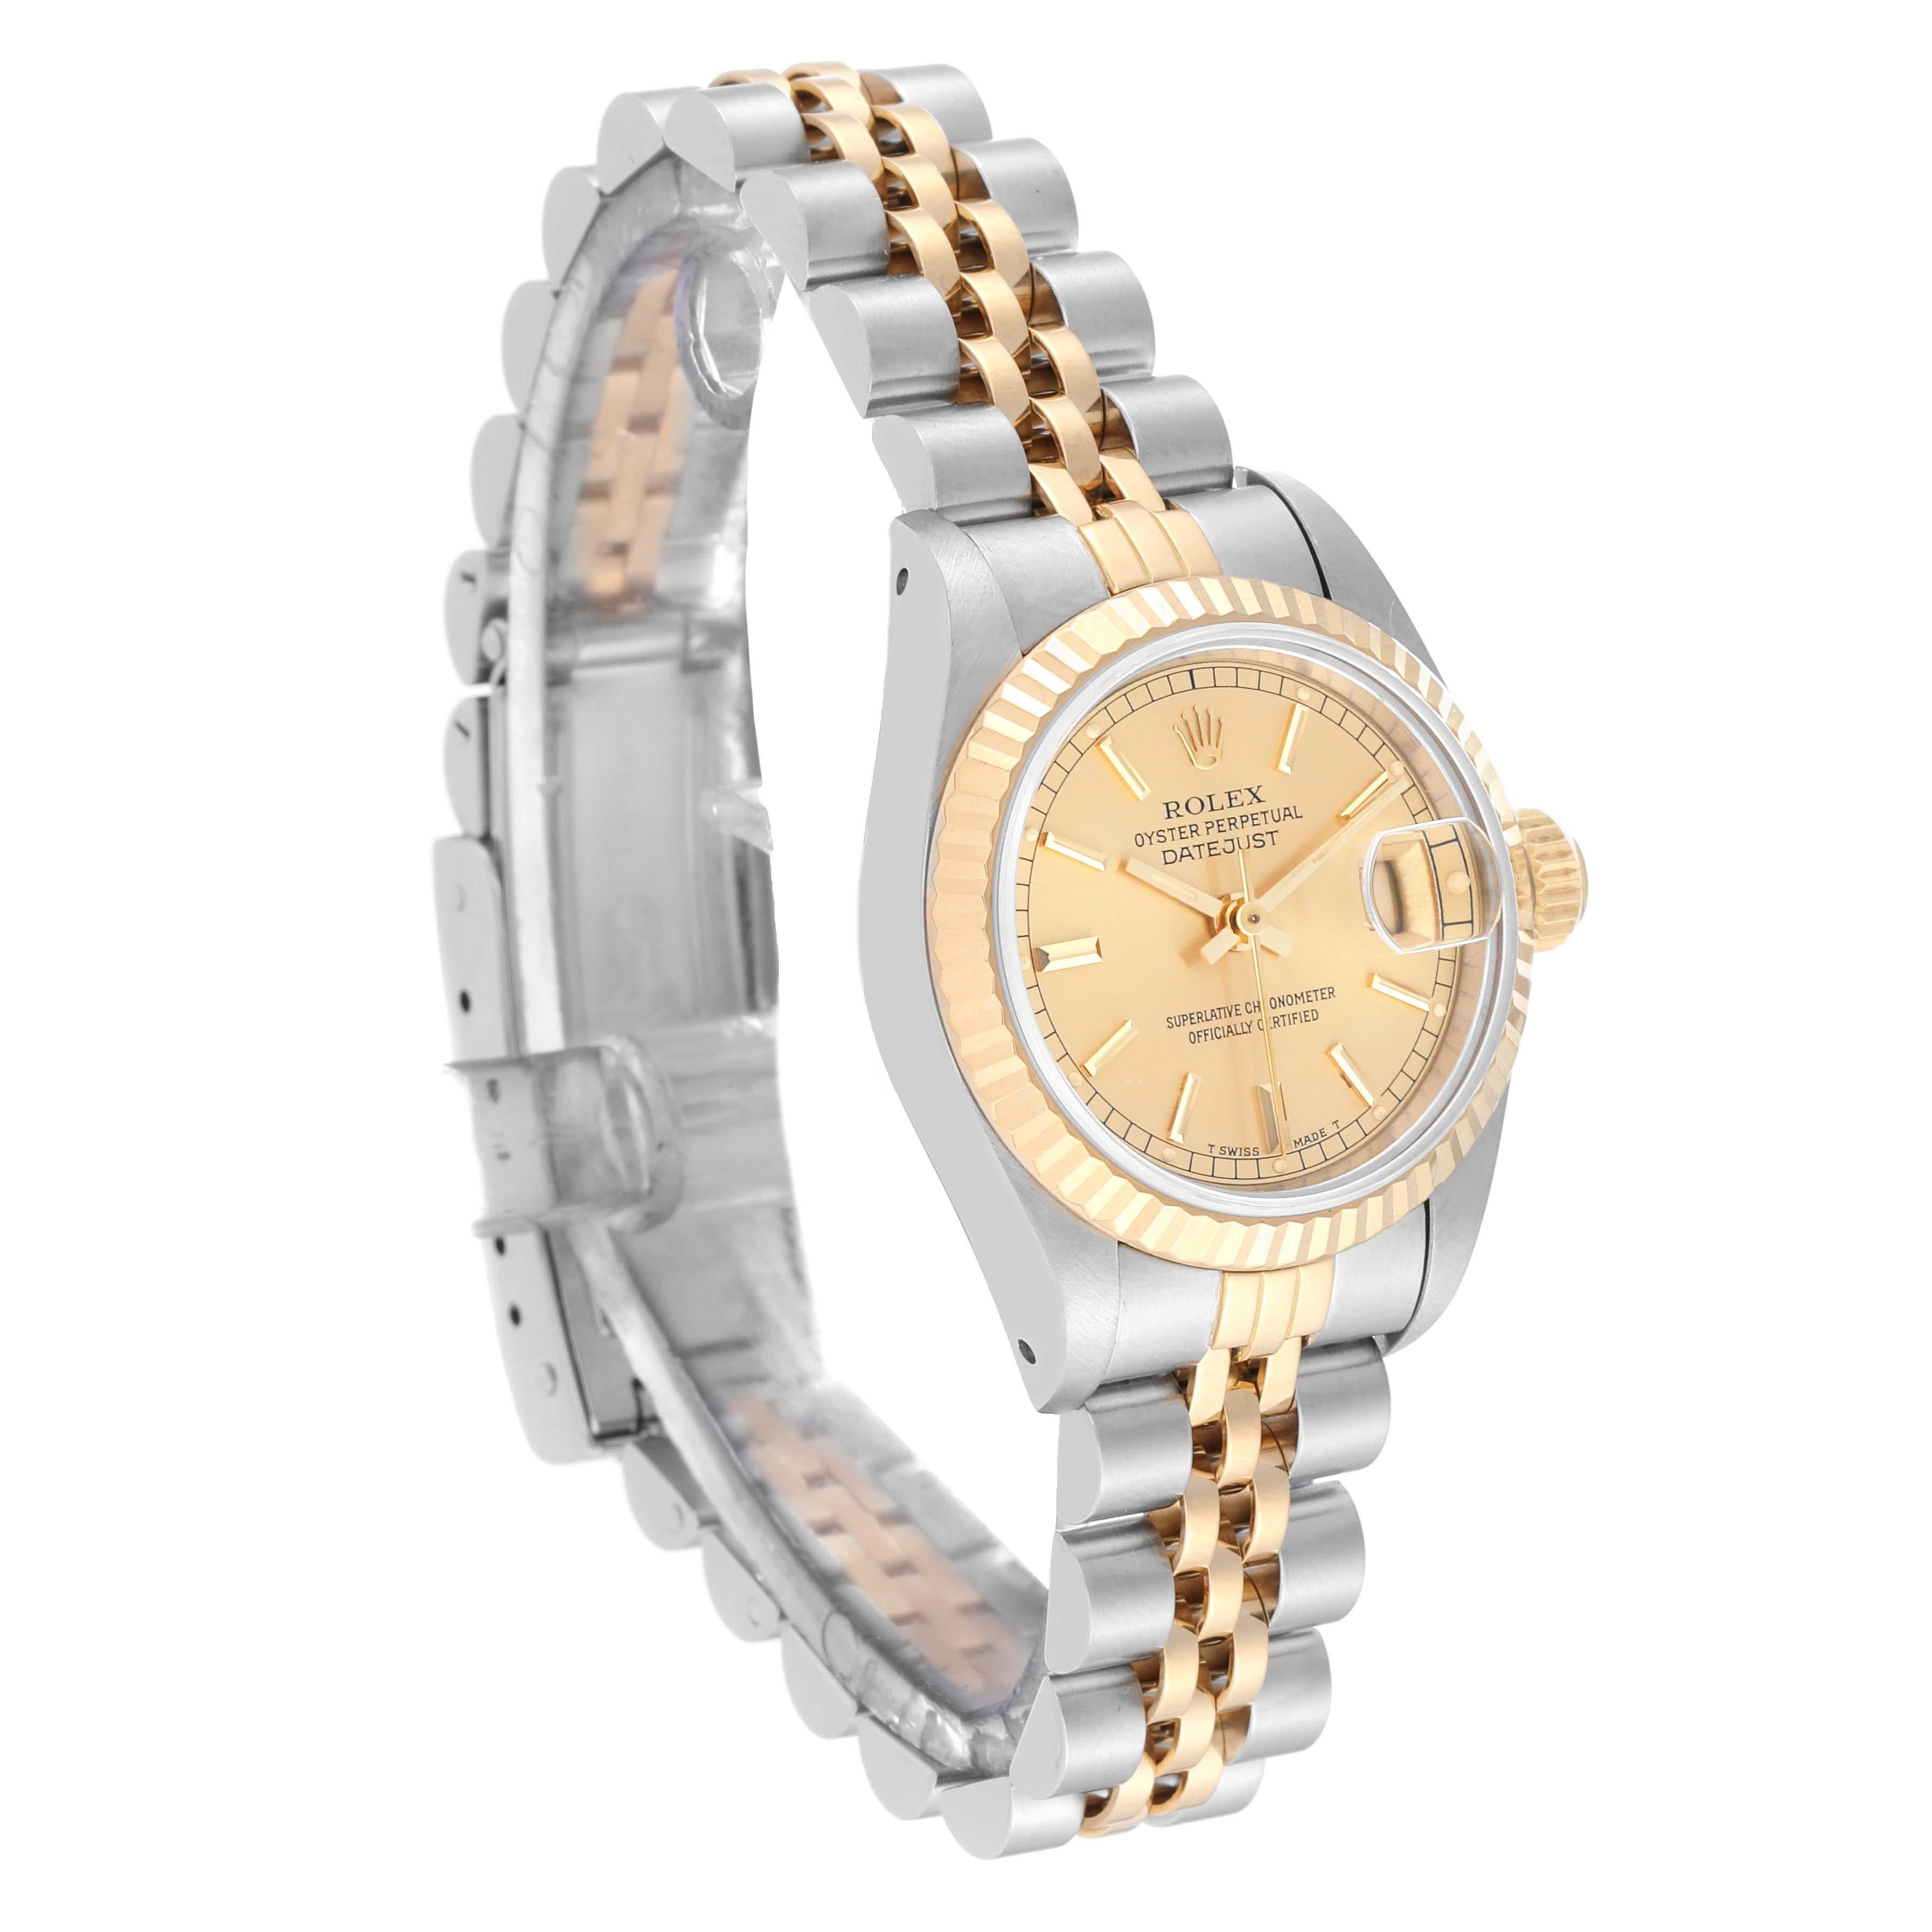 Rolex Datejust Champagne Dial Steel Yellow Gold Ladies Watch 69173. Officially certified chronometer automatic self-winding movement. Stainless steel oyster case 26.0 mm in diameter. Rolex logo on the crown. 18k yellow gold fluted bezel. Scratch